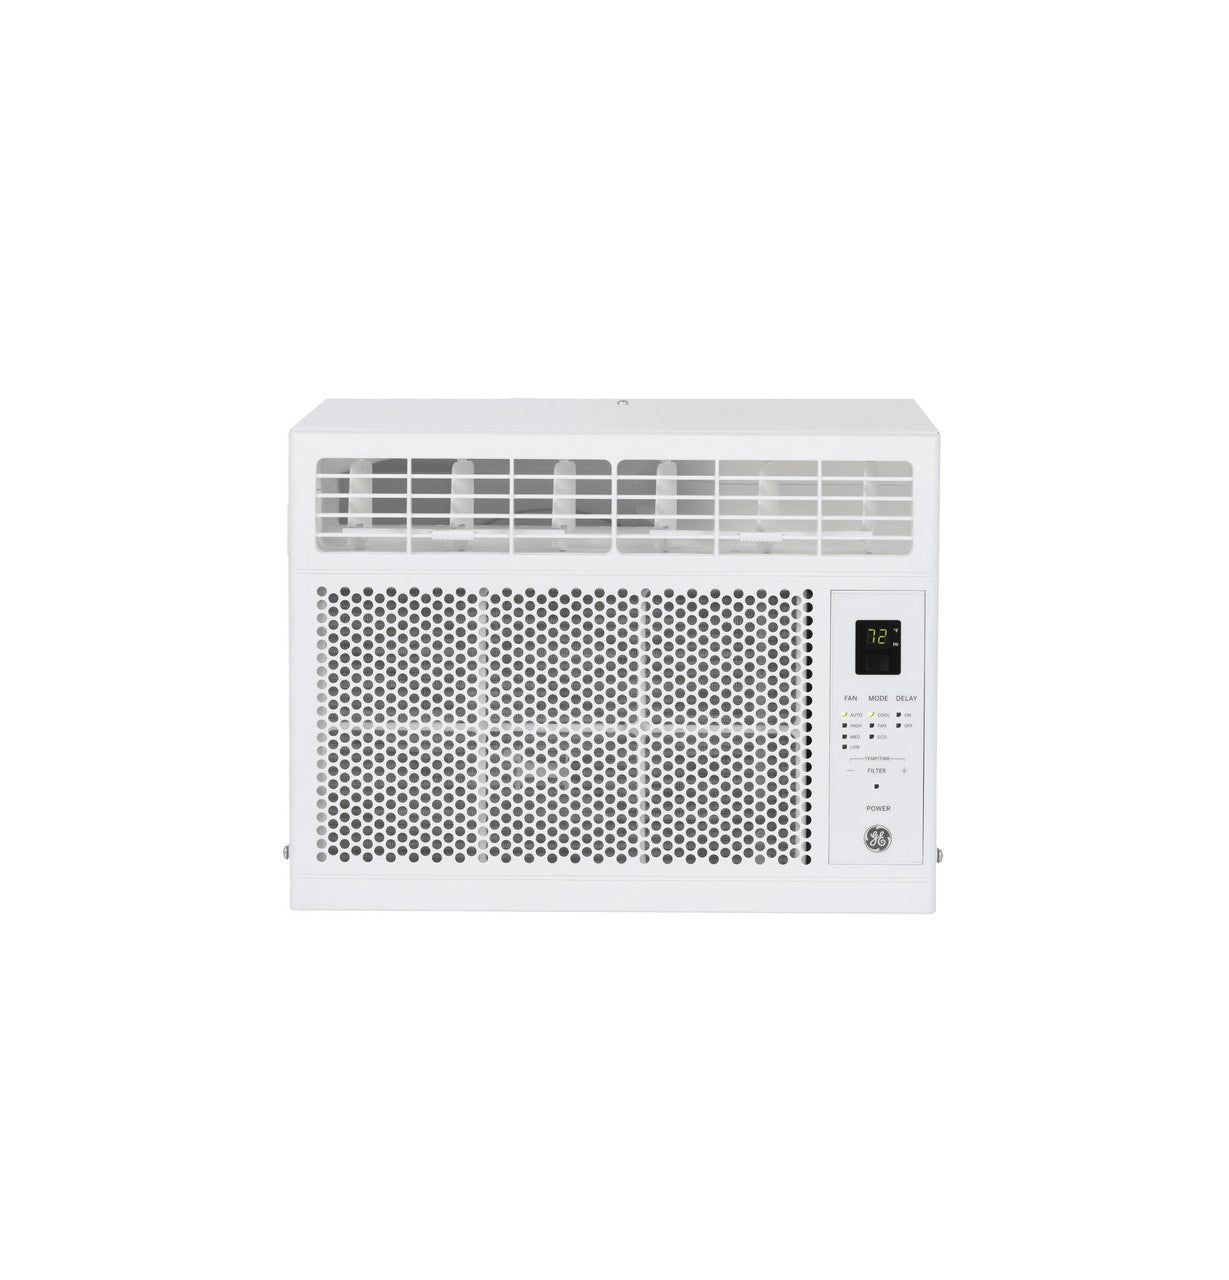 GE 5,000 BTU Electronic Window Air Conditioner for Small Rooms up to 150 sq ft. (Refurbished)